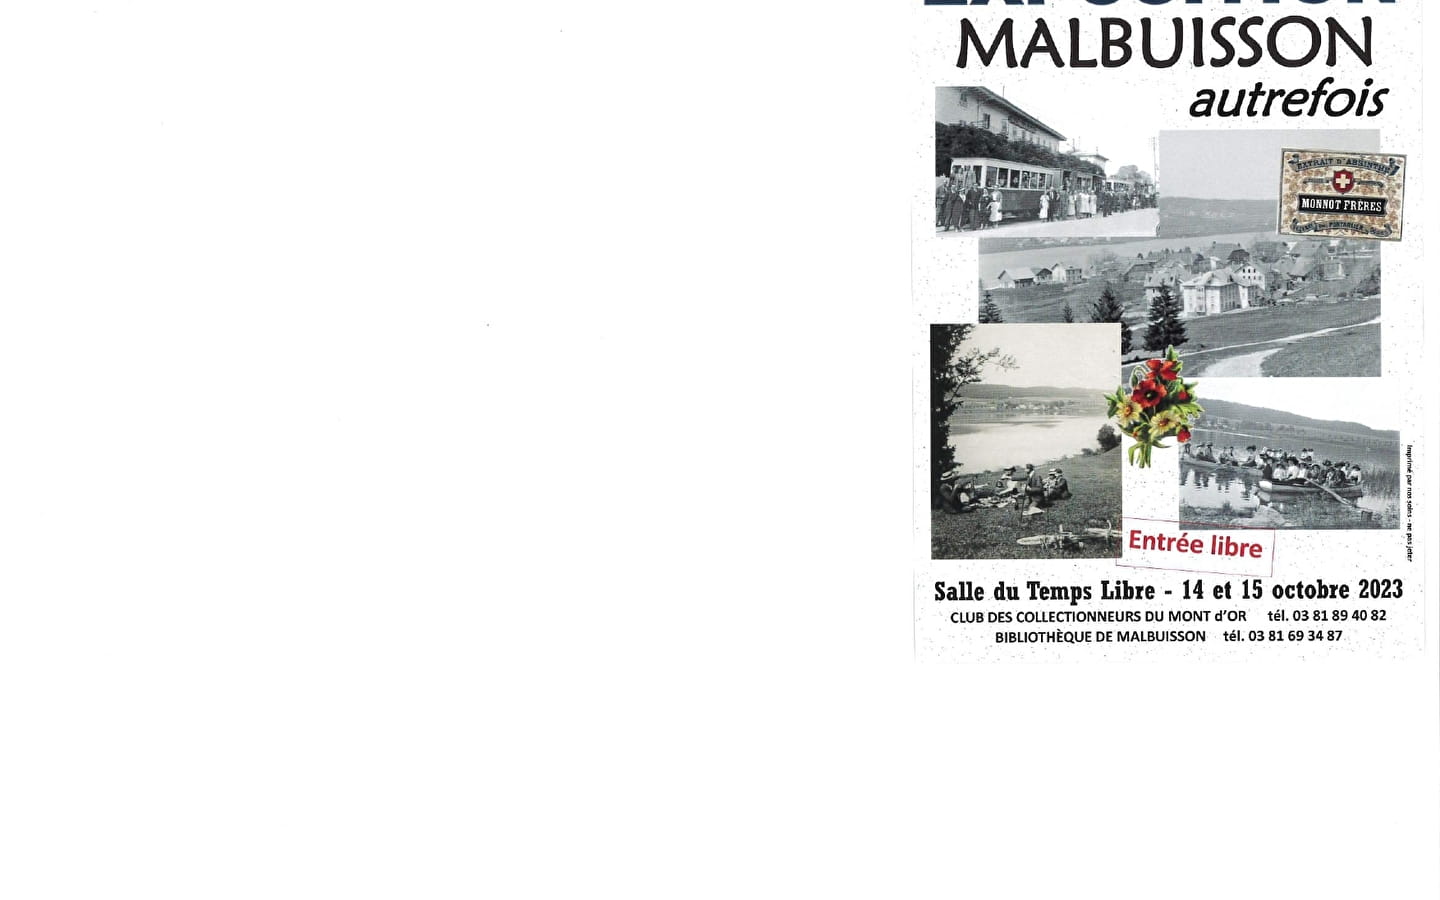 Exhibition - Malbuisson in the past